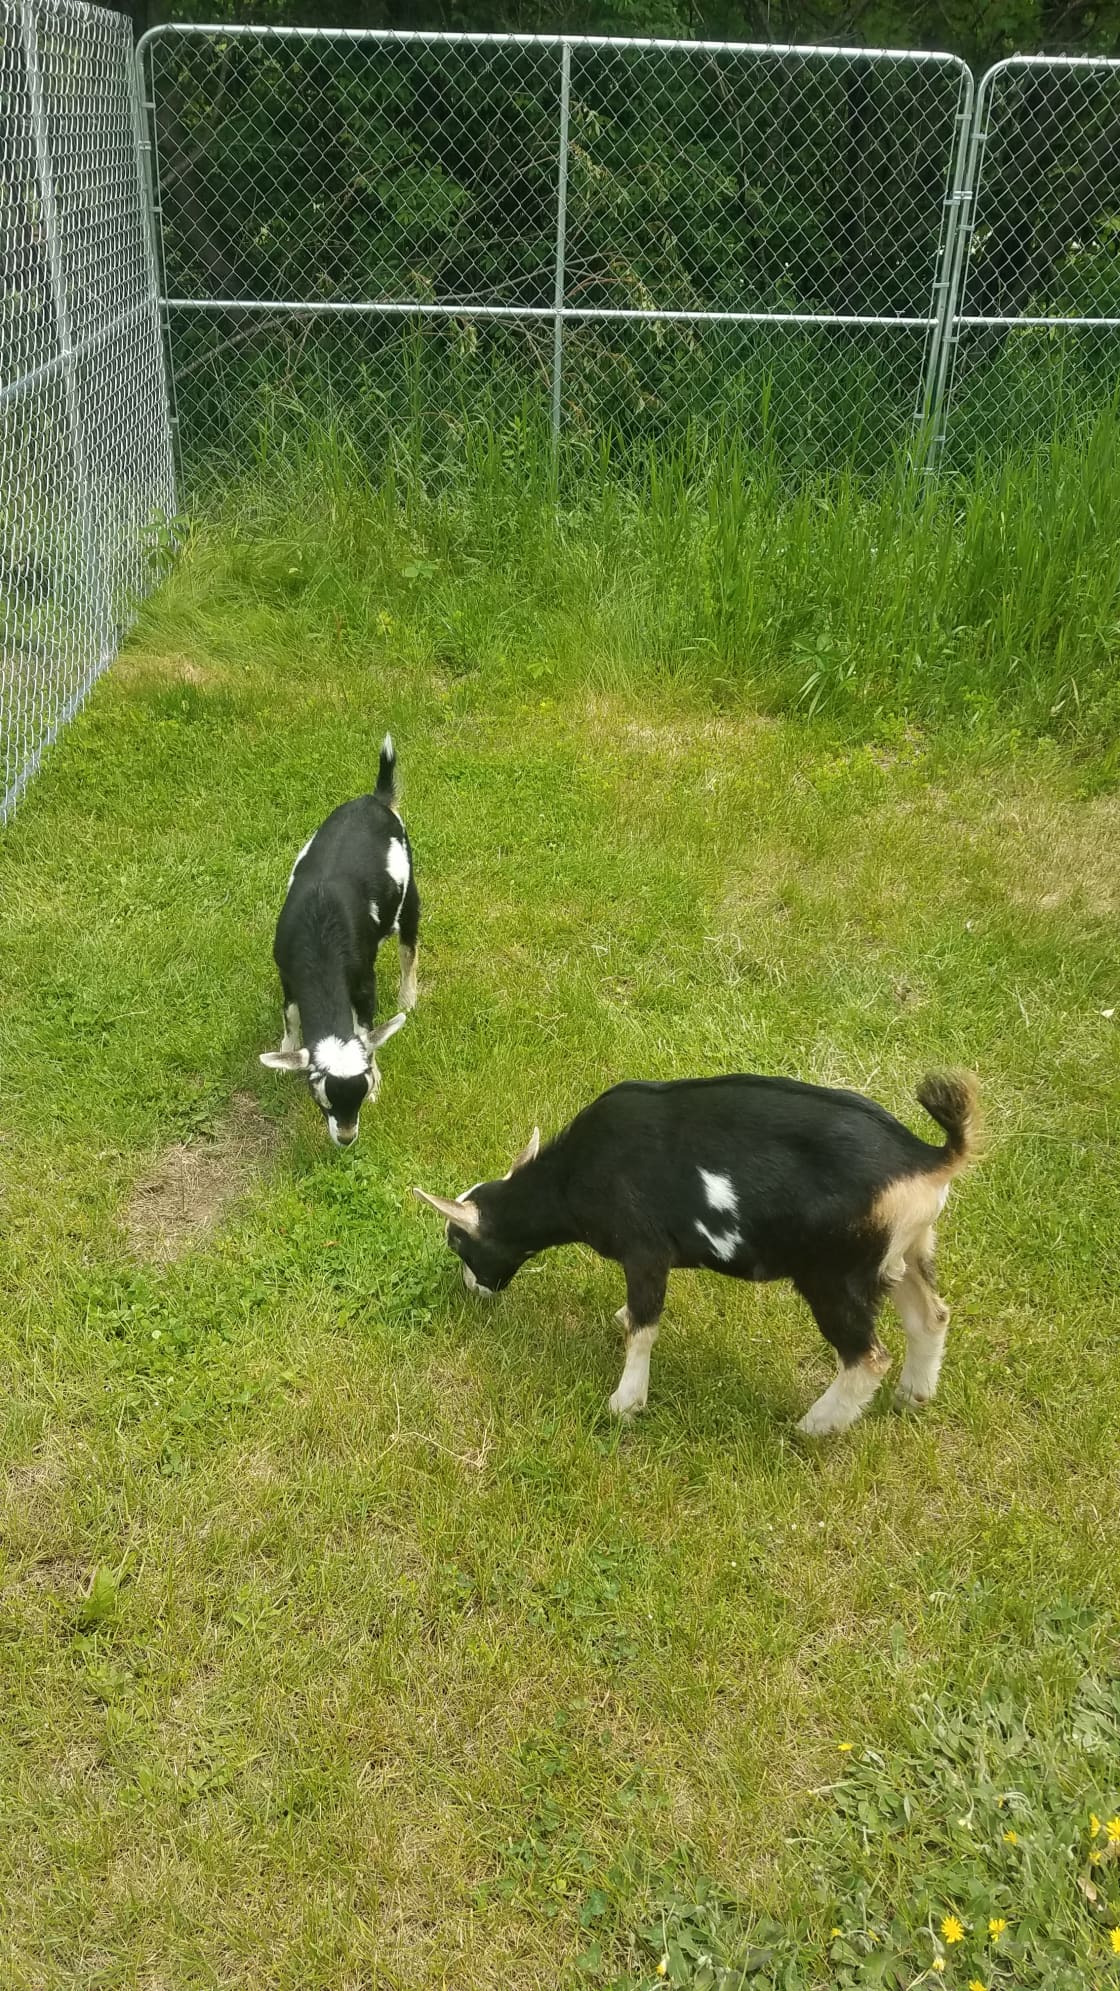 We have very friendly goats on the property to play with!